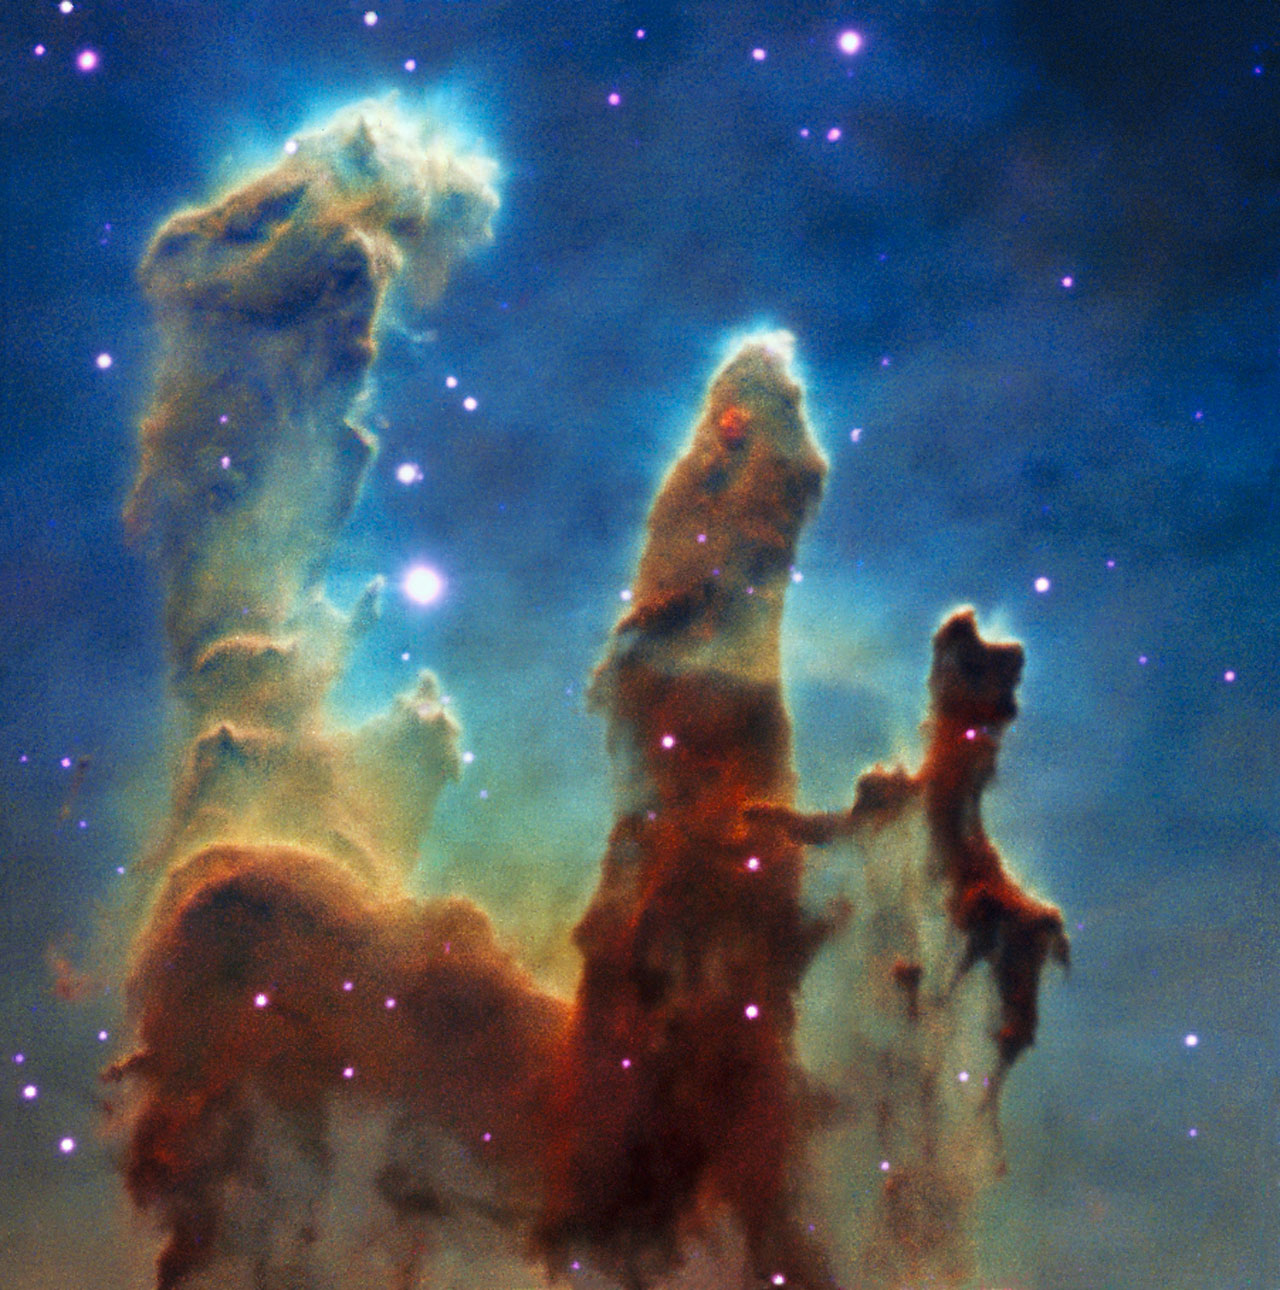 Colour composite view of the Pillars of Creation from MUSE data